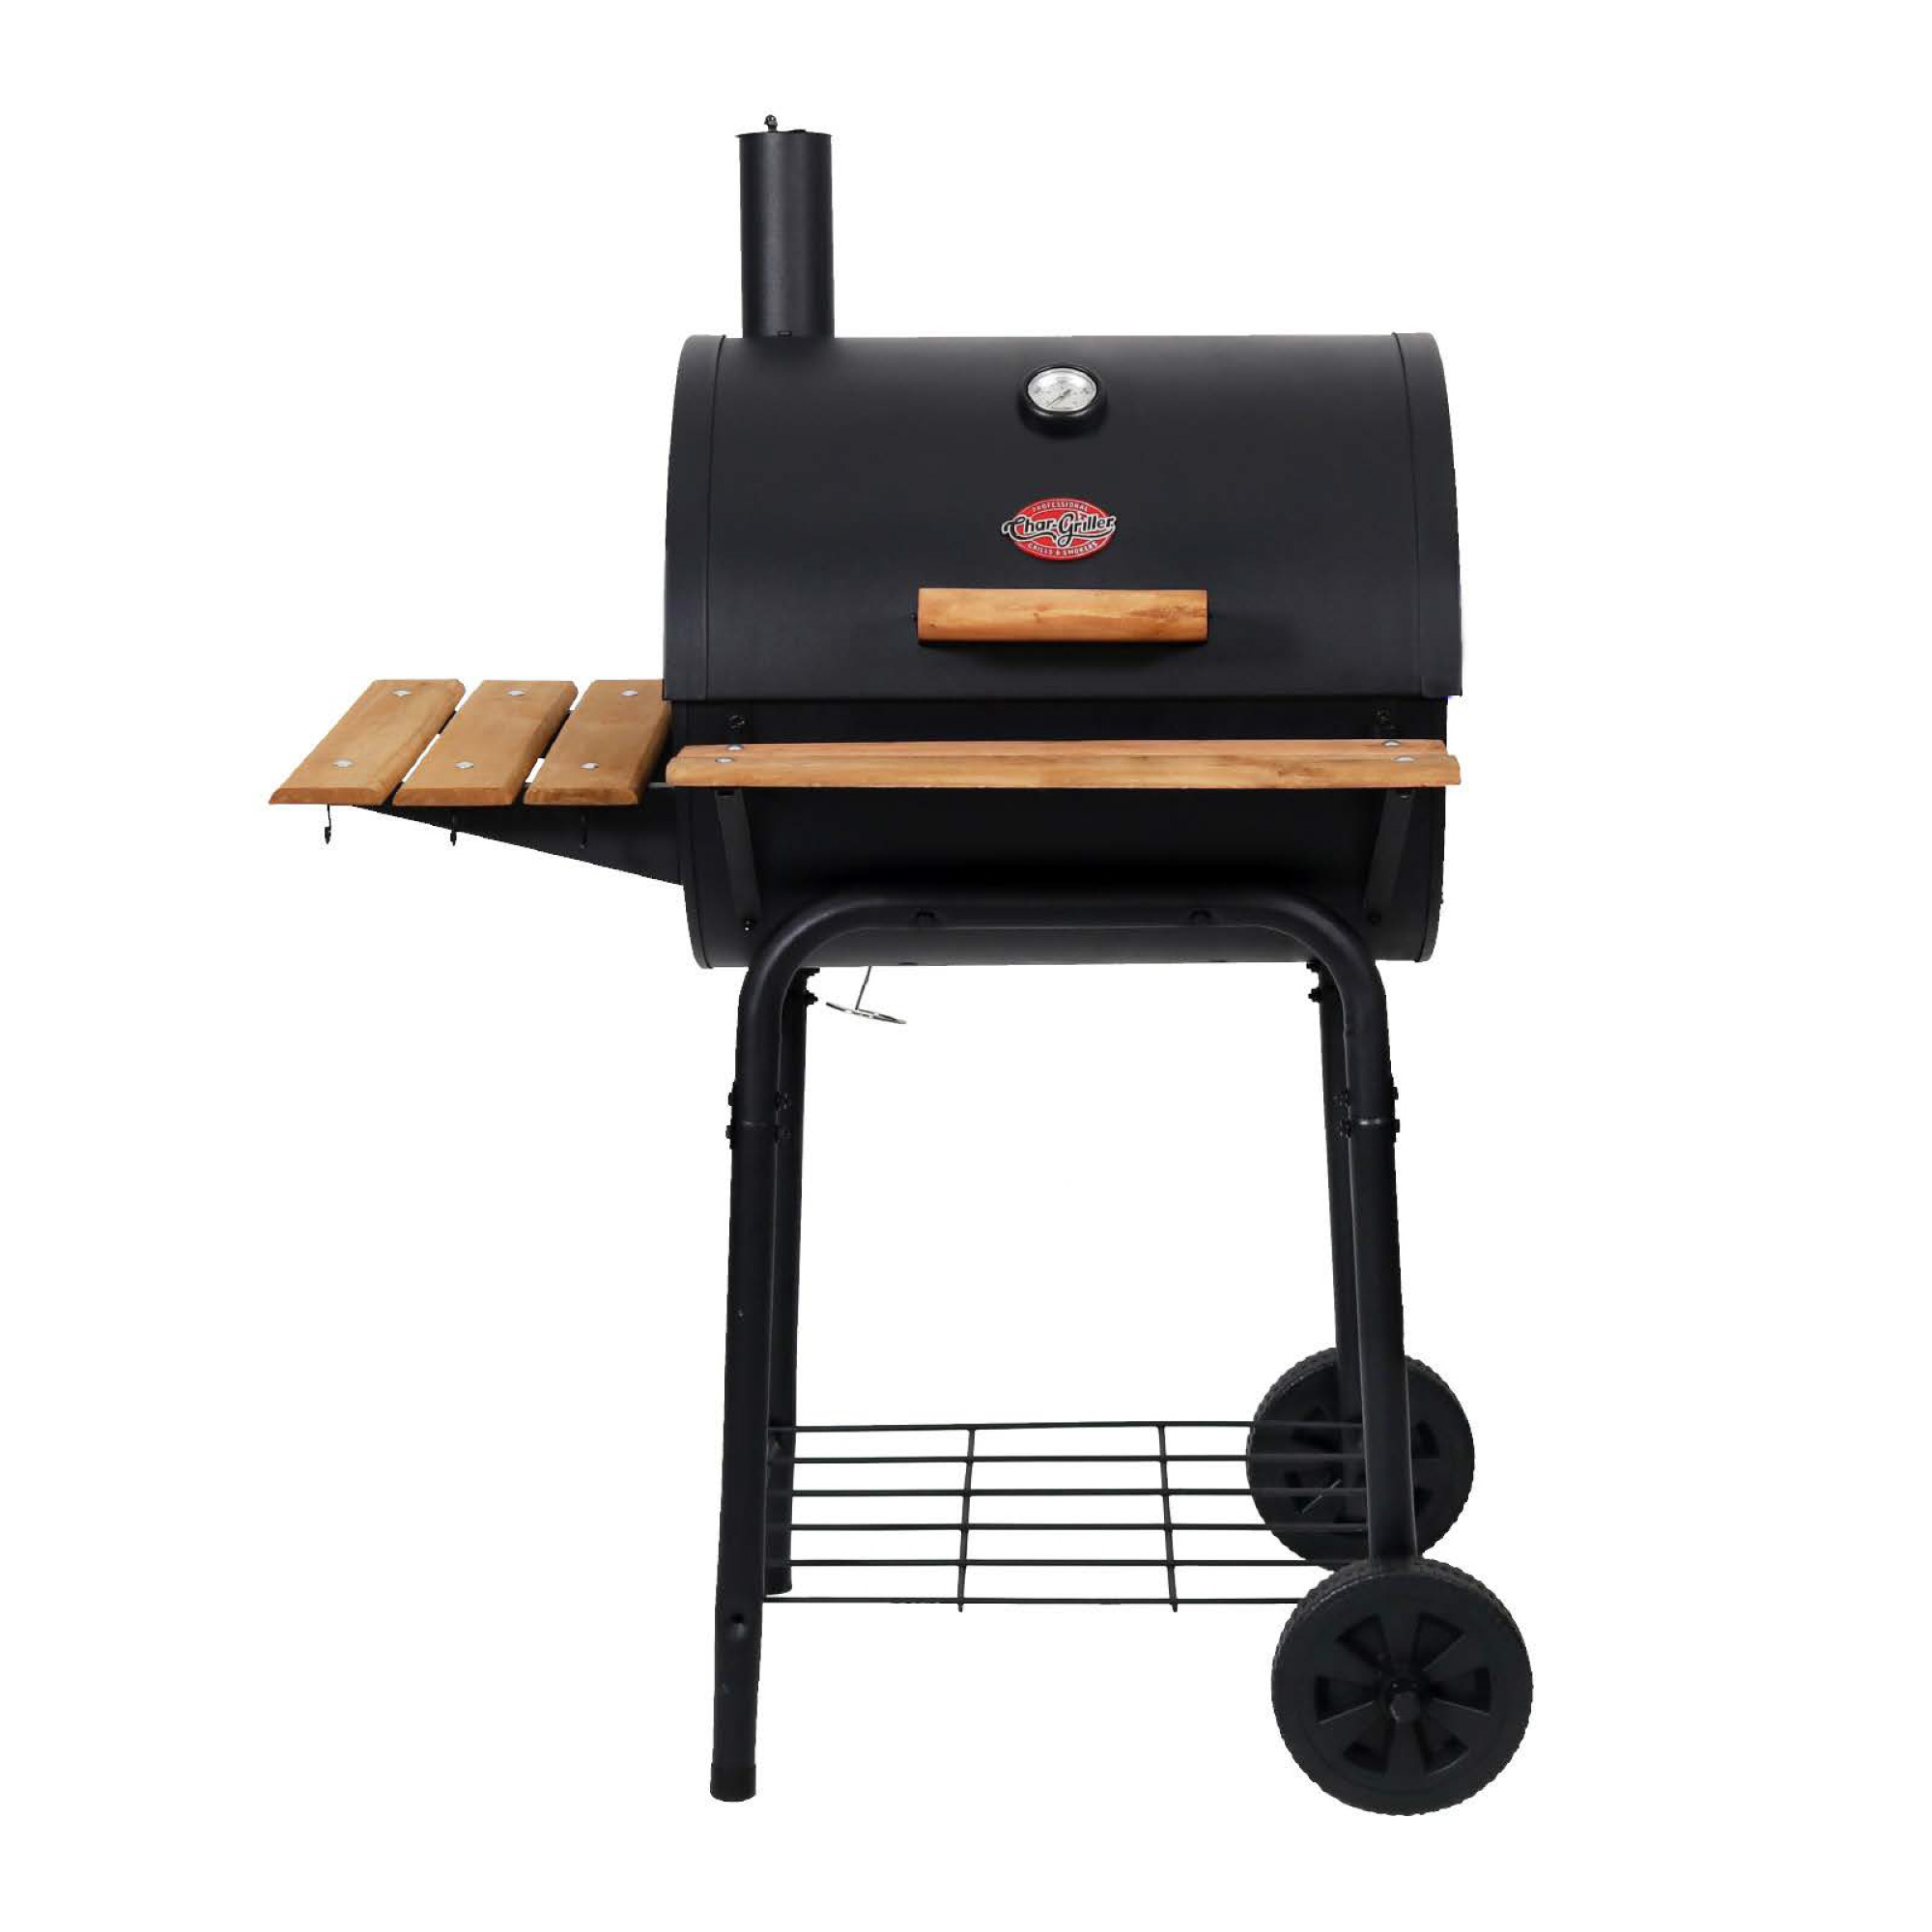 Char-Griller Wrangler Outdoor Cooking Heavy Duty Steel Charcoal Barbecue Grill - image 1 of 16